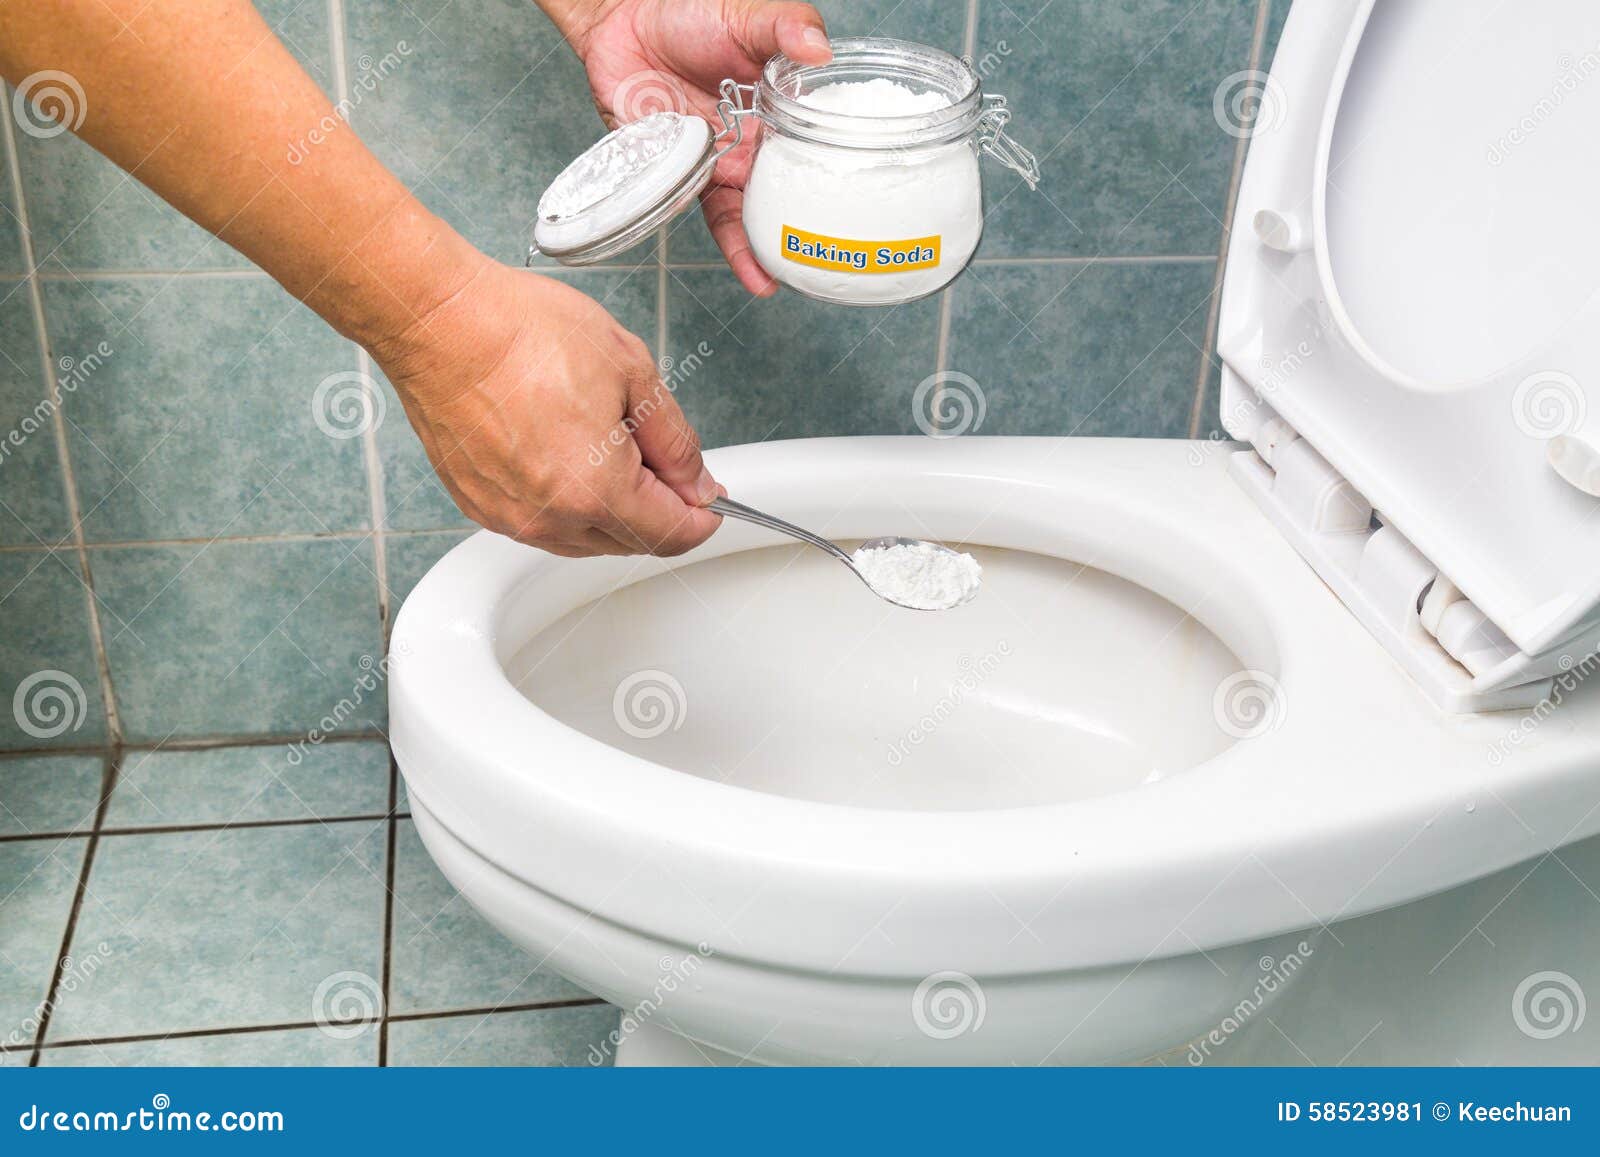 https://thumbs.dreamstime.com/z/baking-soda-used-to-clean-disinfect-bathroom-toilet-bowl-58523981.jpg